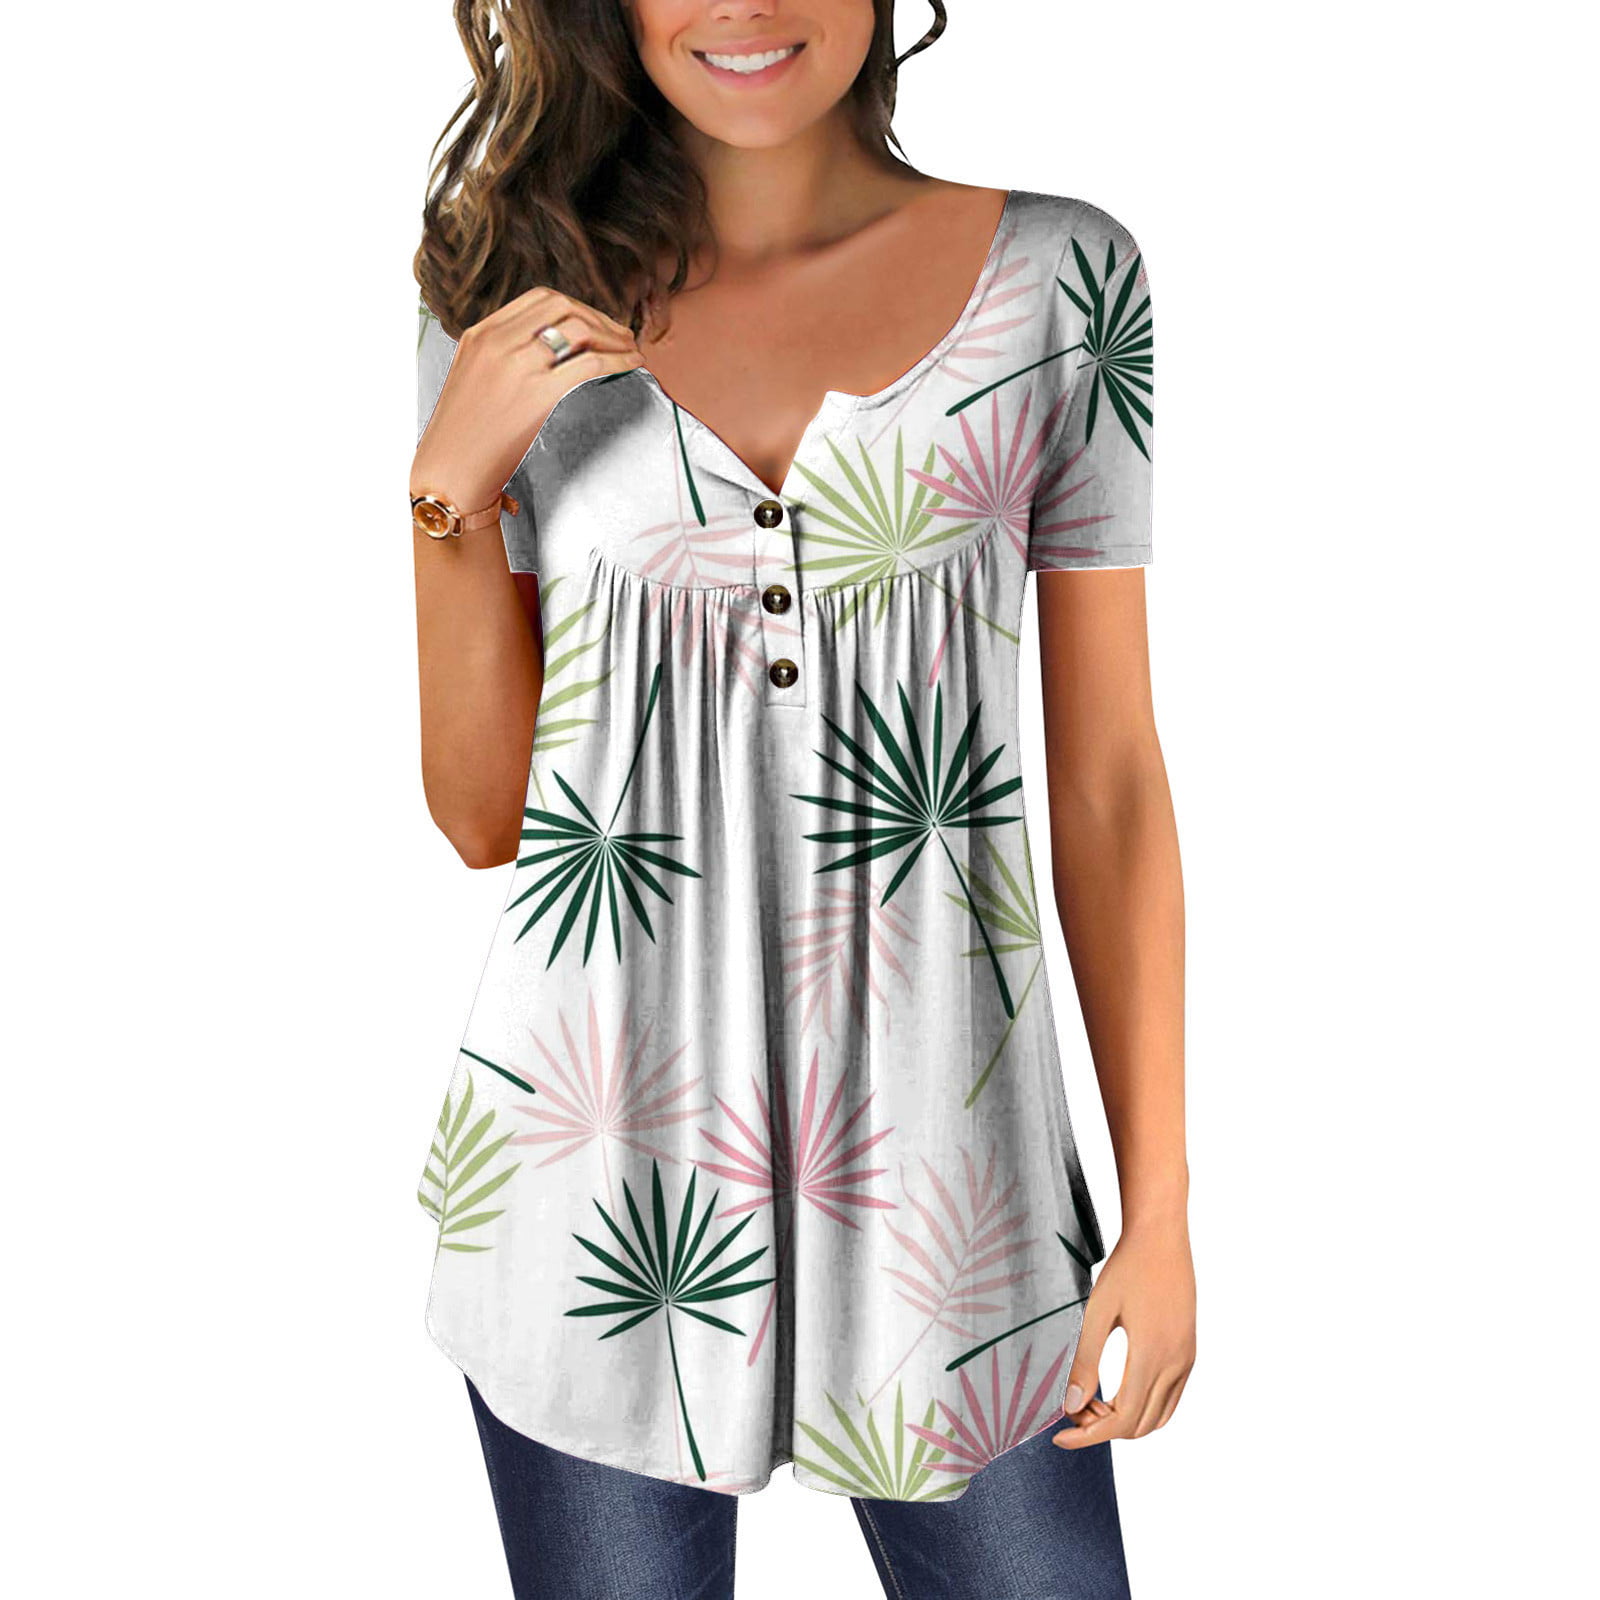 Top for Women,Clearance Women Casual Print Loose Shirts V Neck